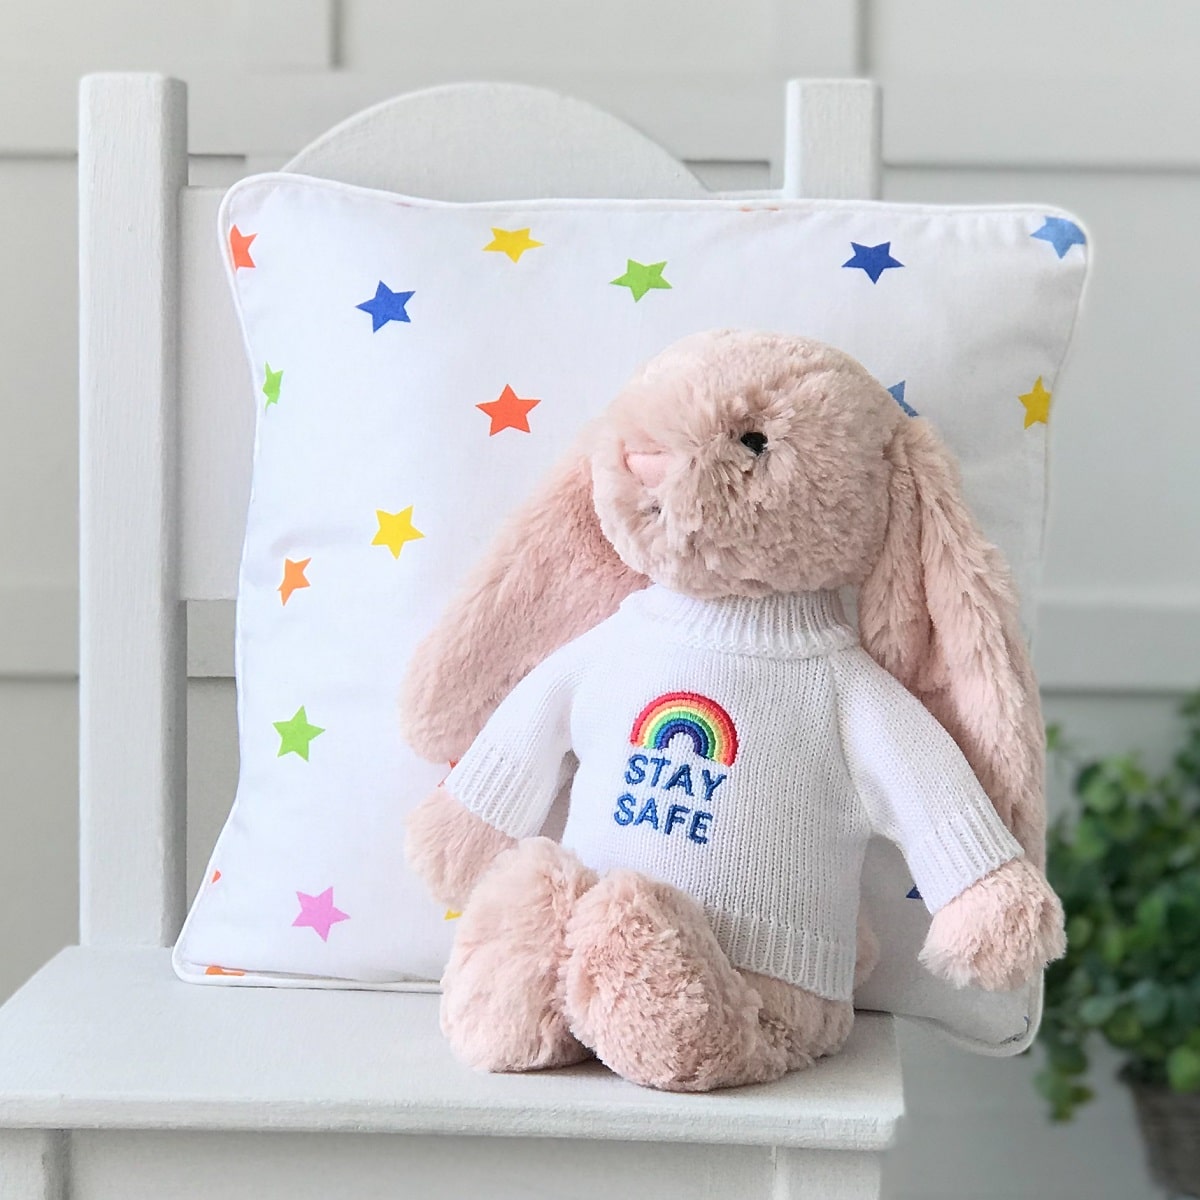 Jellycat medium bashful bunny soft toy with ‘Stay Safe’ jumper in Blush Pink